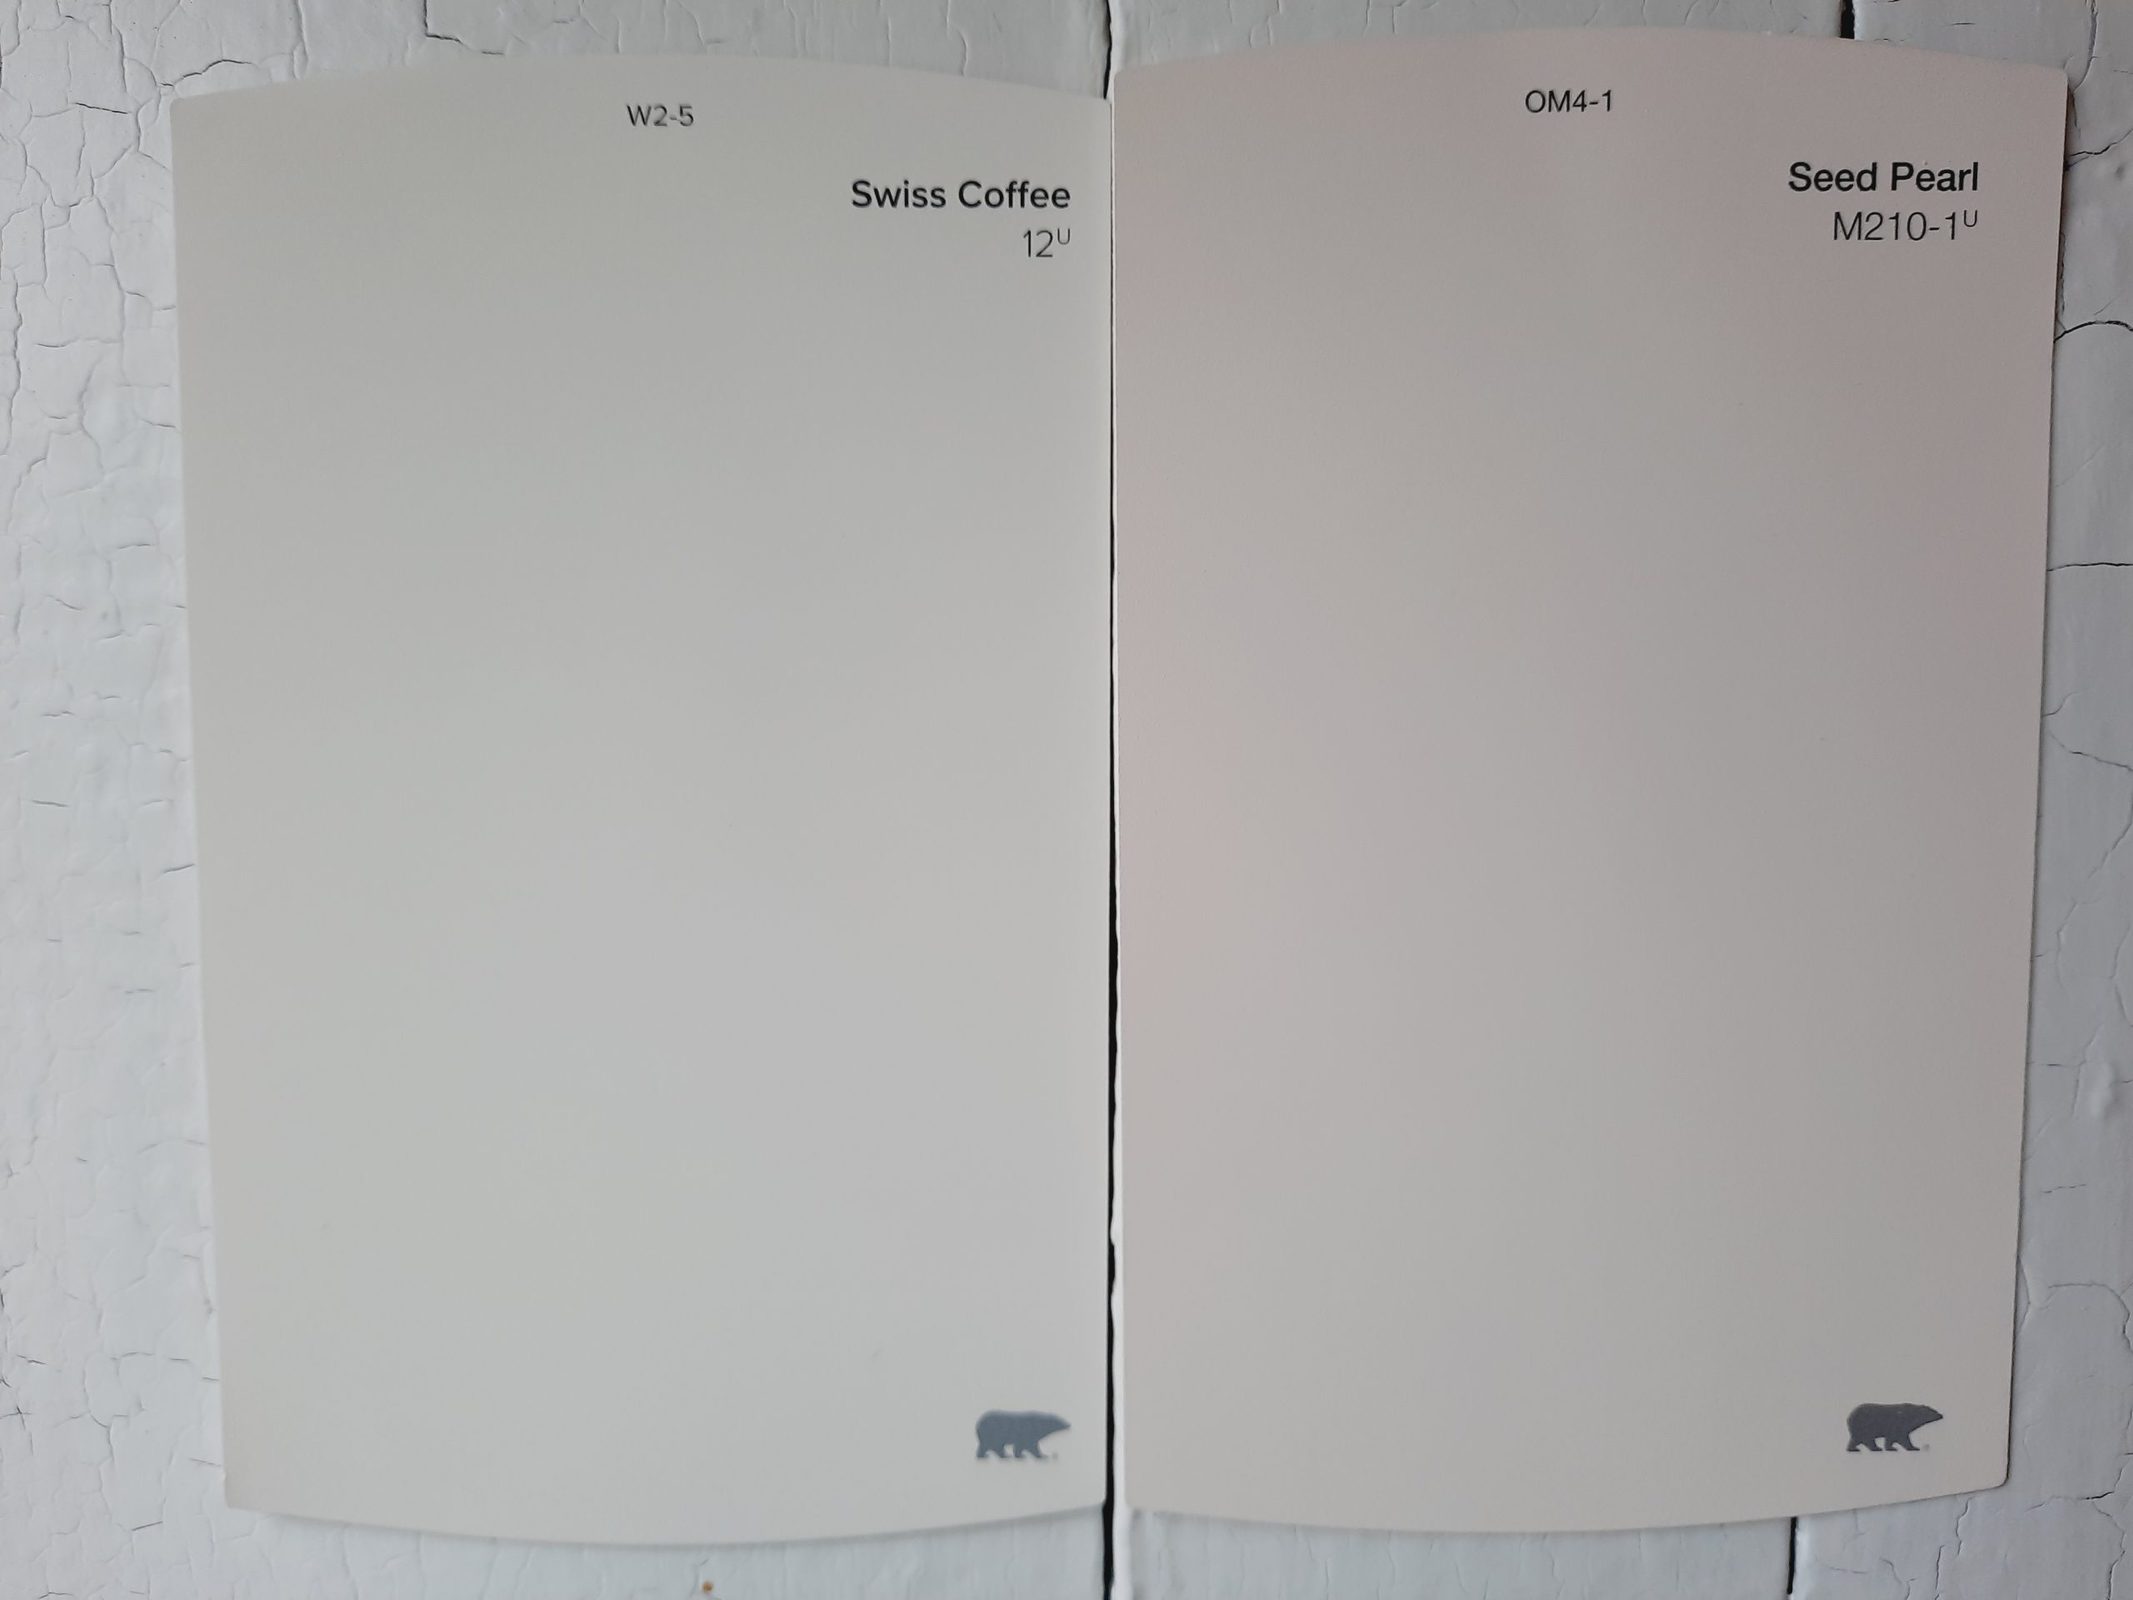 6 Swiss Coffee vs Seed Pearl by Behr scaled